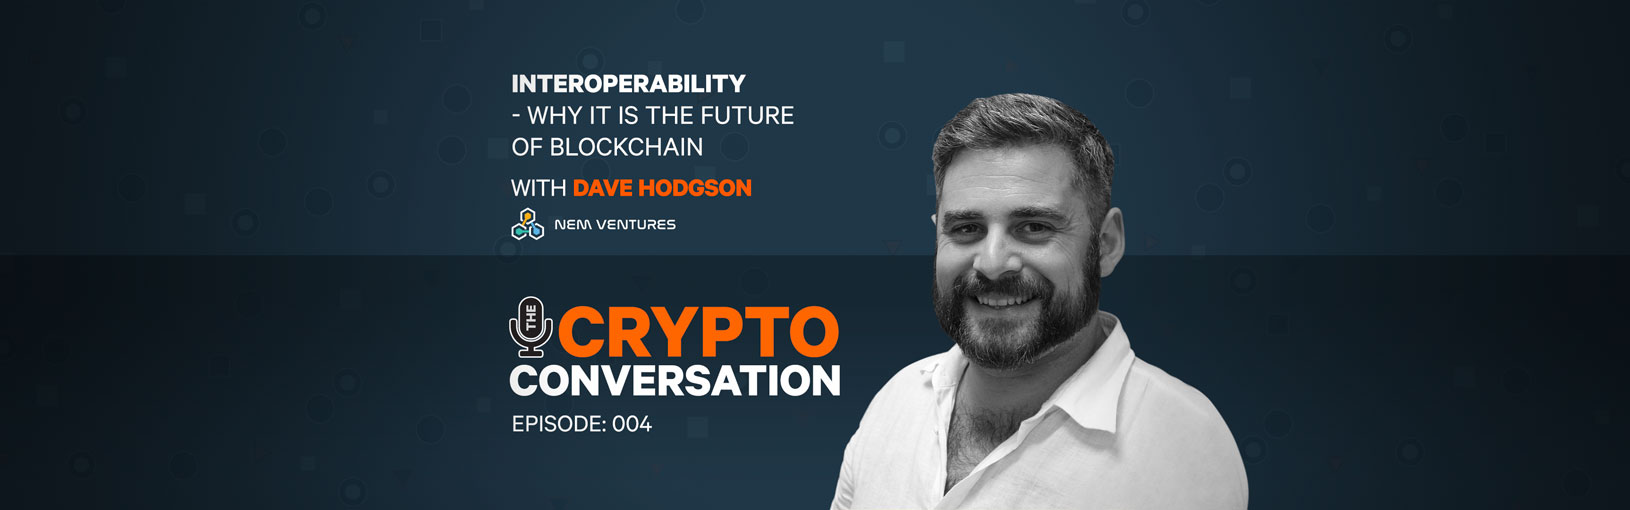 Interoperability – Why it is the future of Blockchain with Dave Hodgson